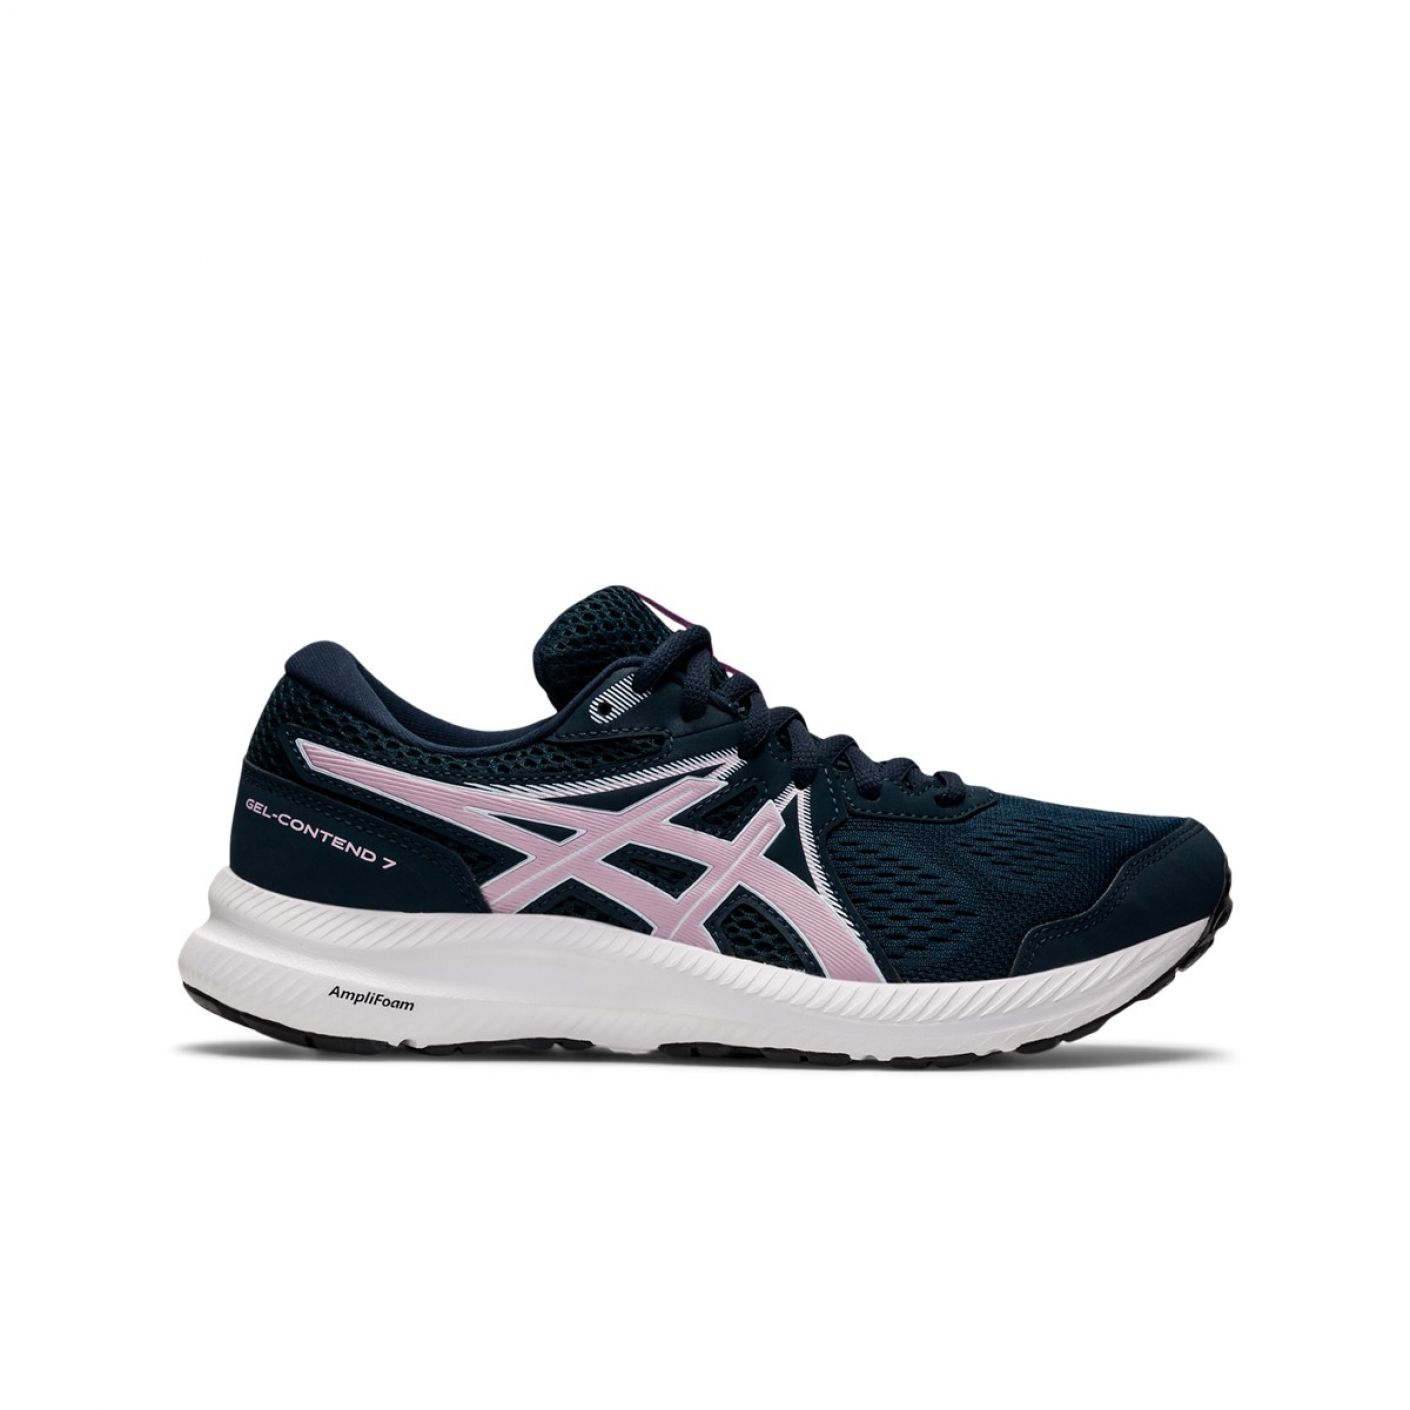 Asics Gel Contend 7 French Blue/Barely Rose